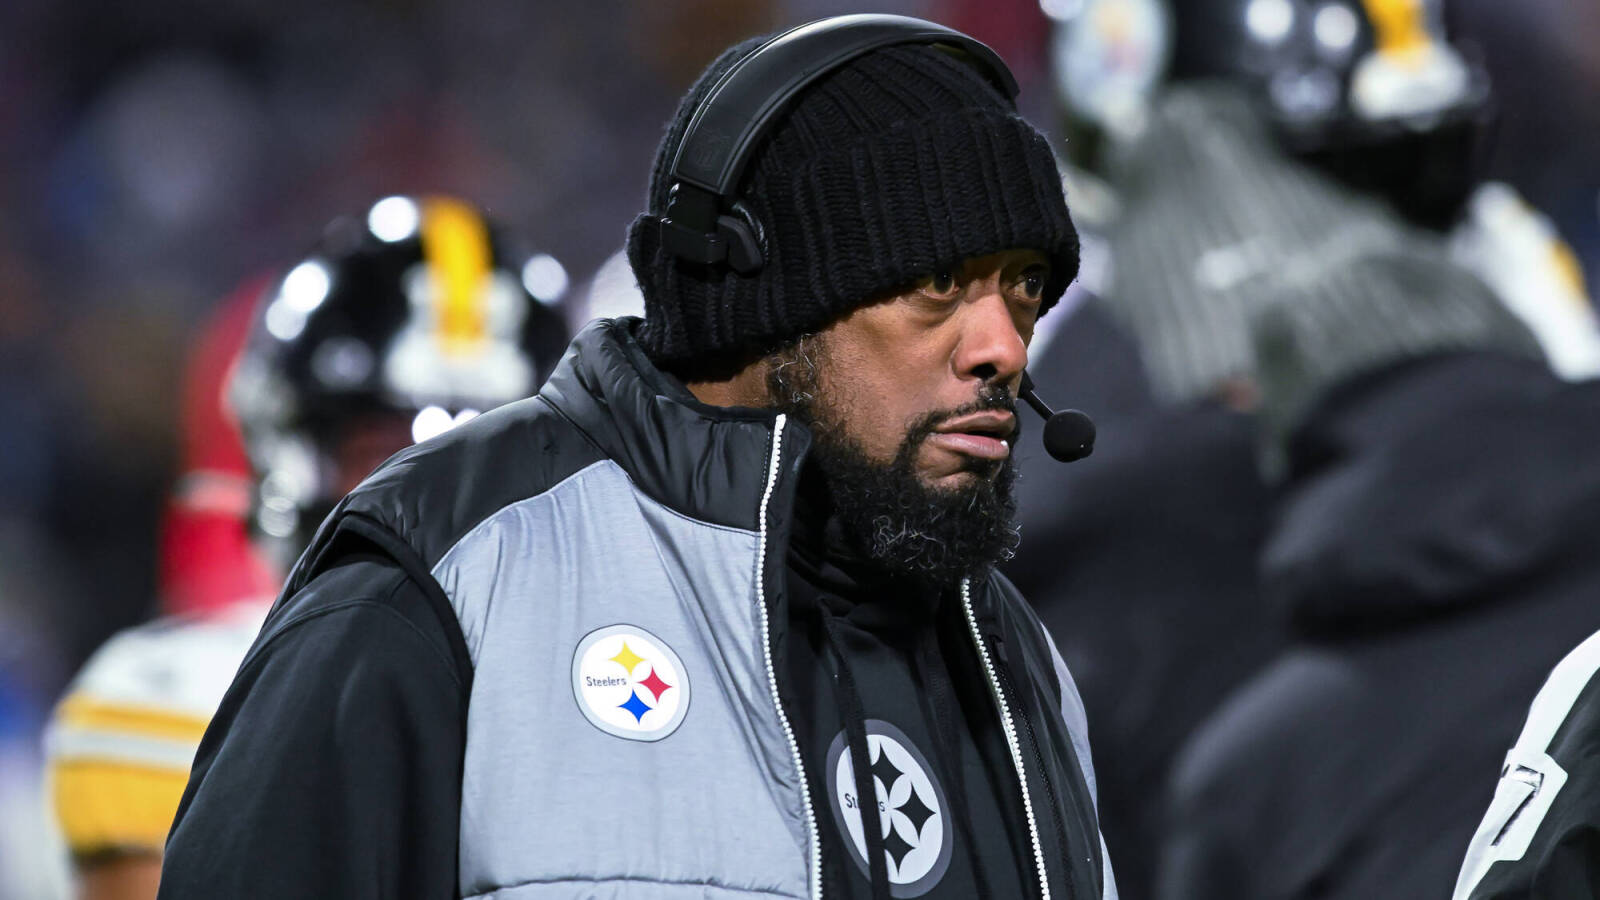 Analyst thinks Steelers' Mike Tomlin could face career low this season